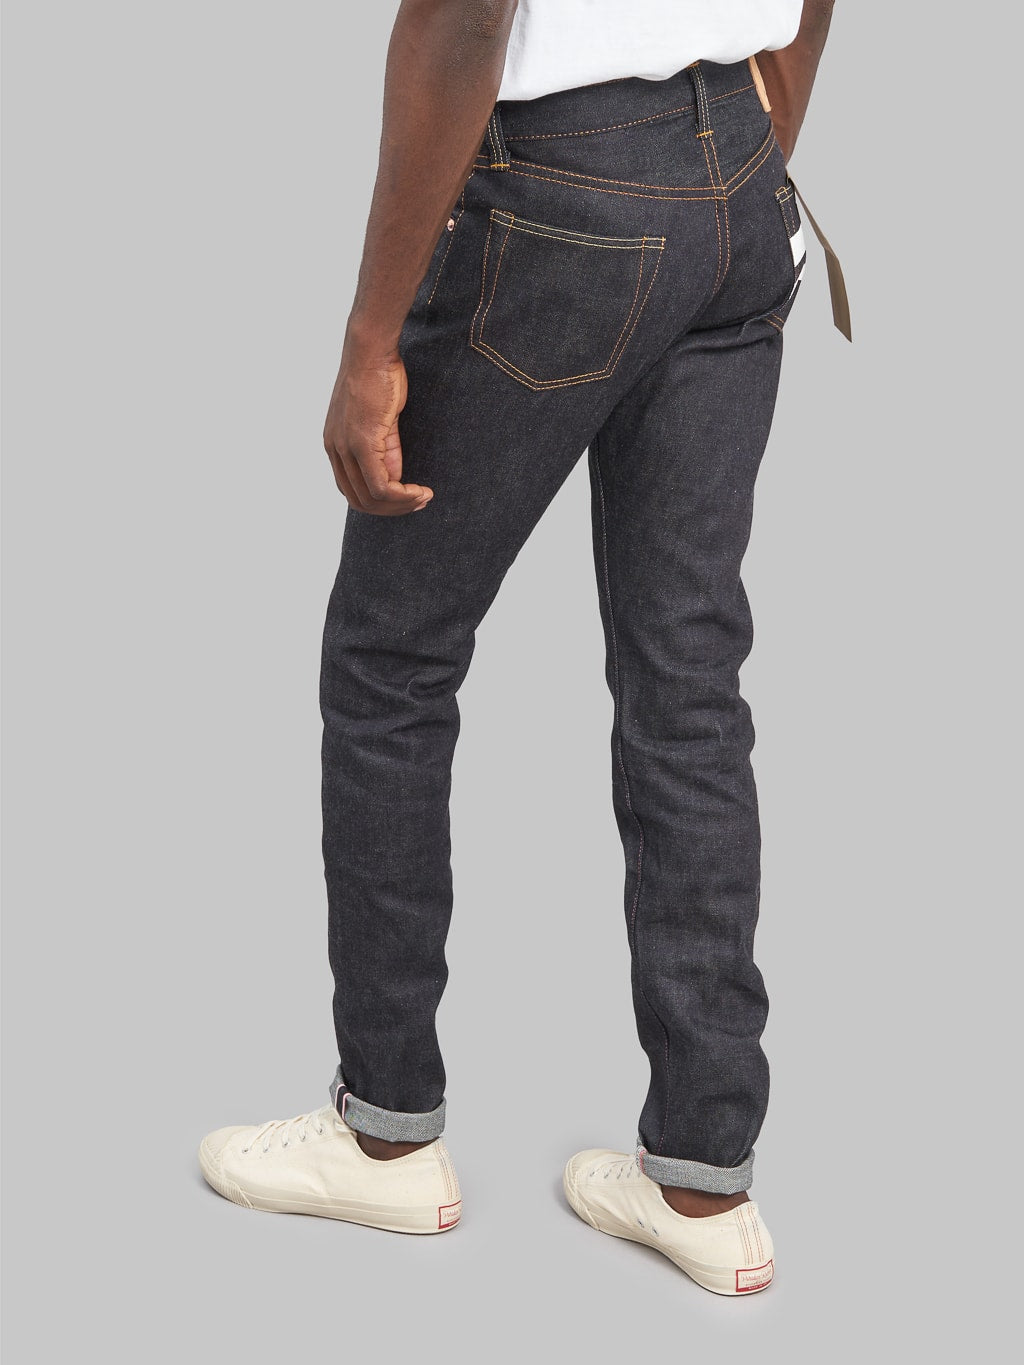 Momotaro 0405 12 going to batle 12oz high Tapered Jeans style